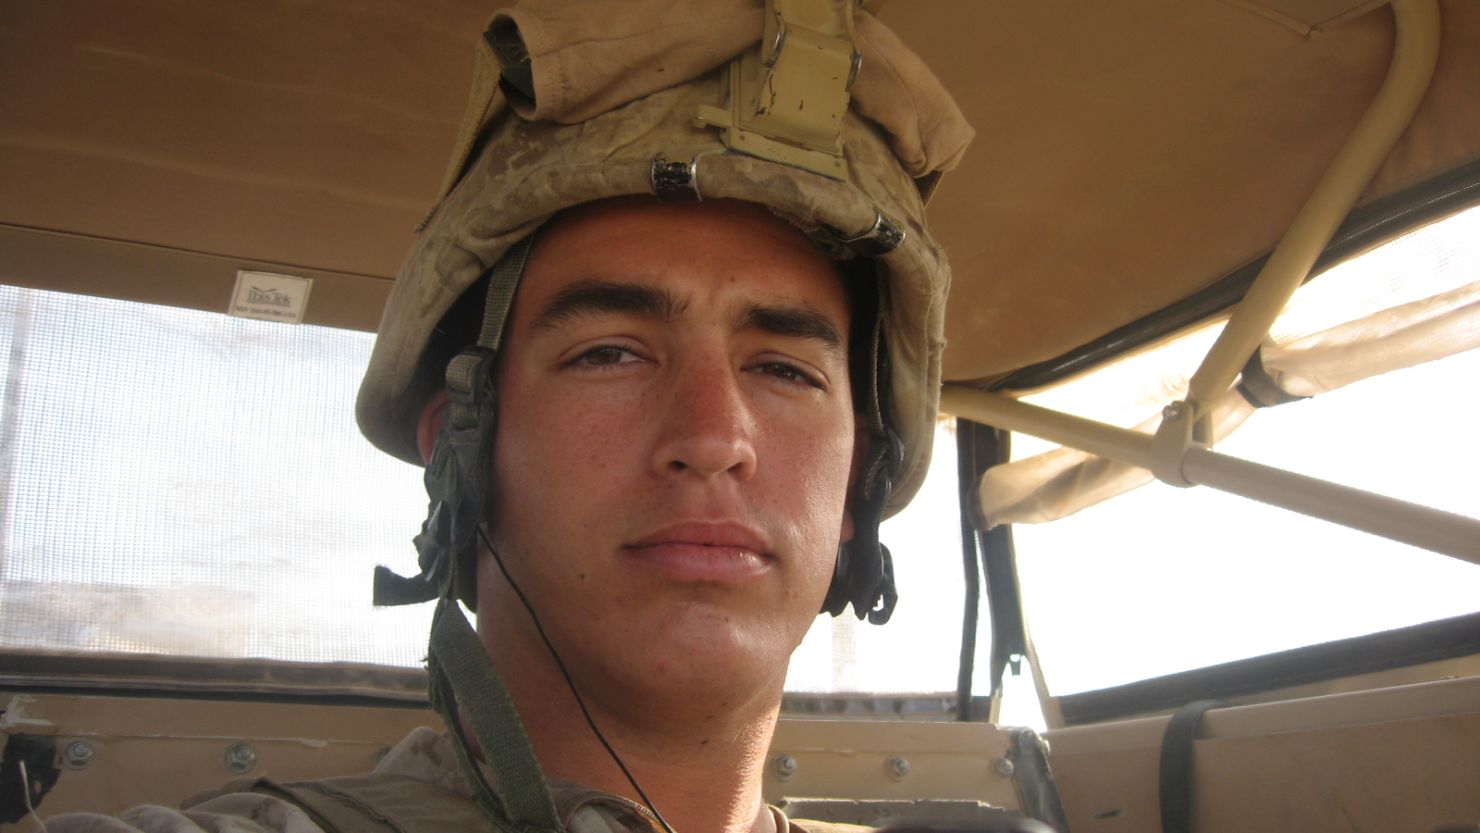 Sgt. Andrew Tahmooressi served with the Marines in Afghanistan.